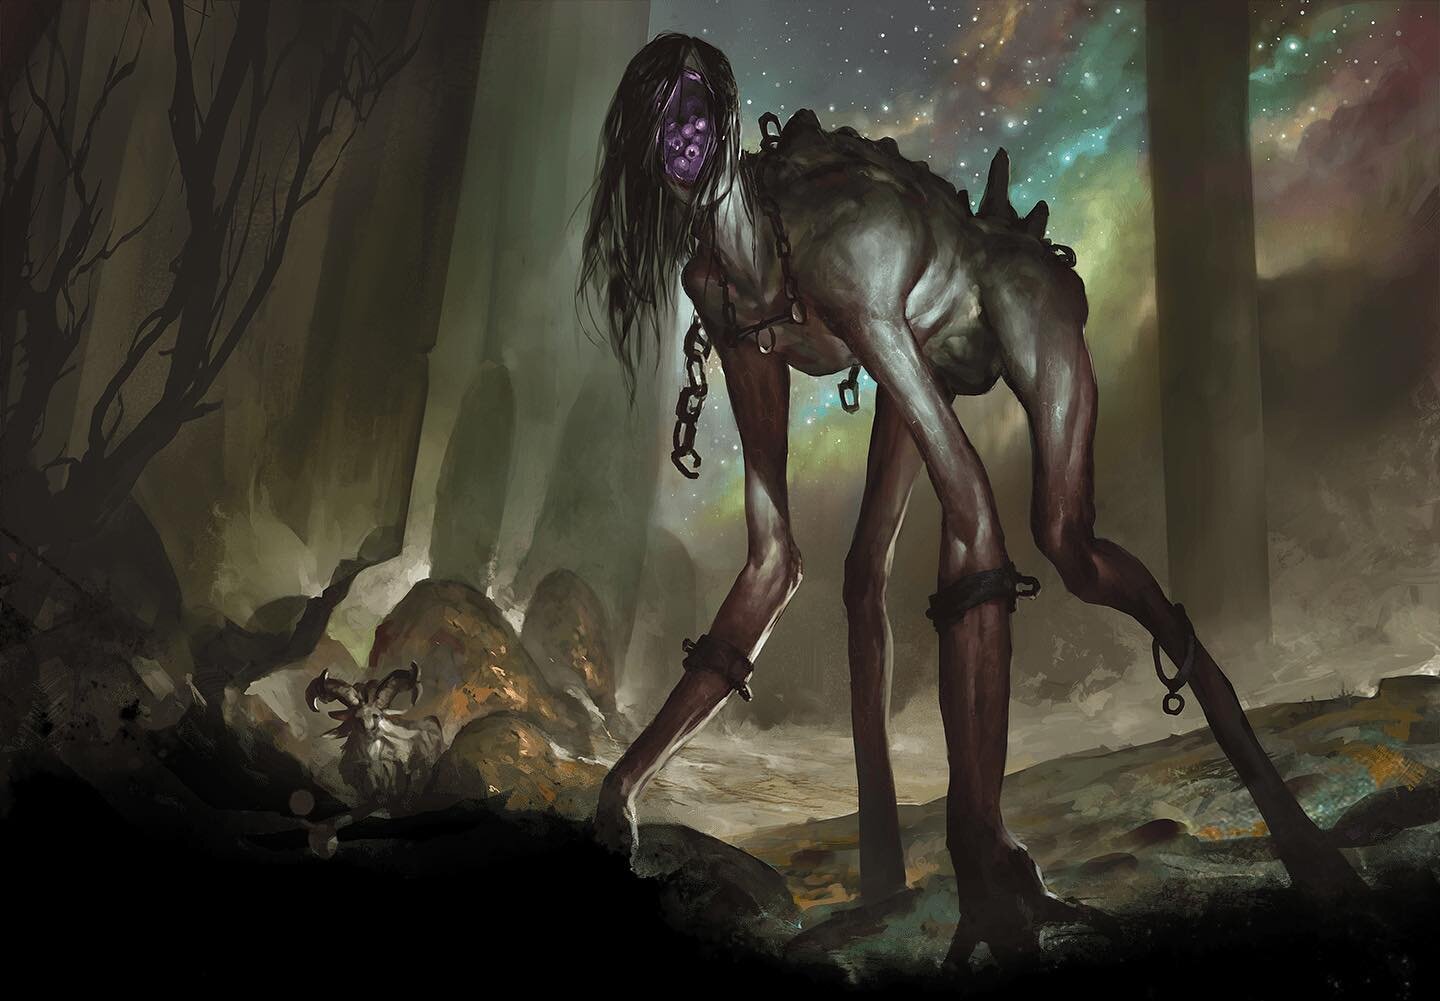 Spooky season is upon us! And so is the Woe Strider 💀 

What would you do if you were face to face with this eyeball eating void creature that could negate magic? 

Run? Yeah, us too. Listen to S4E6 - The First Unned today! Link in bio

Art from dnd